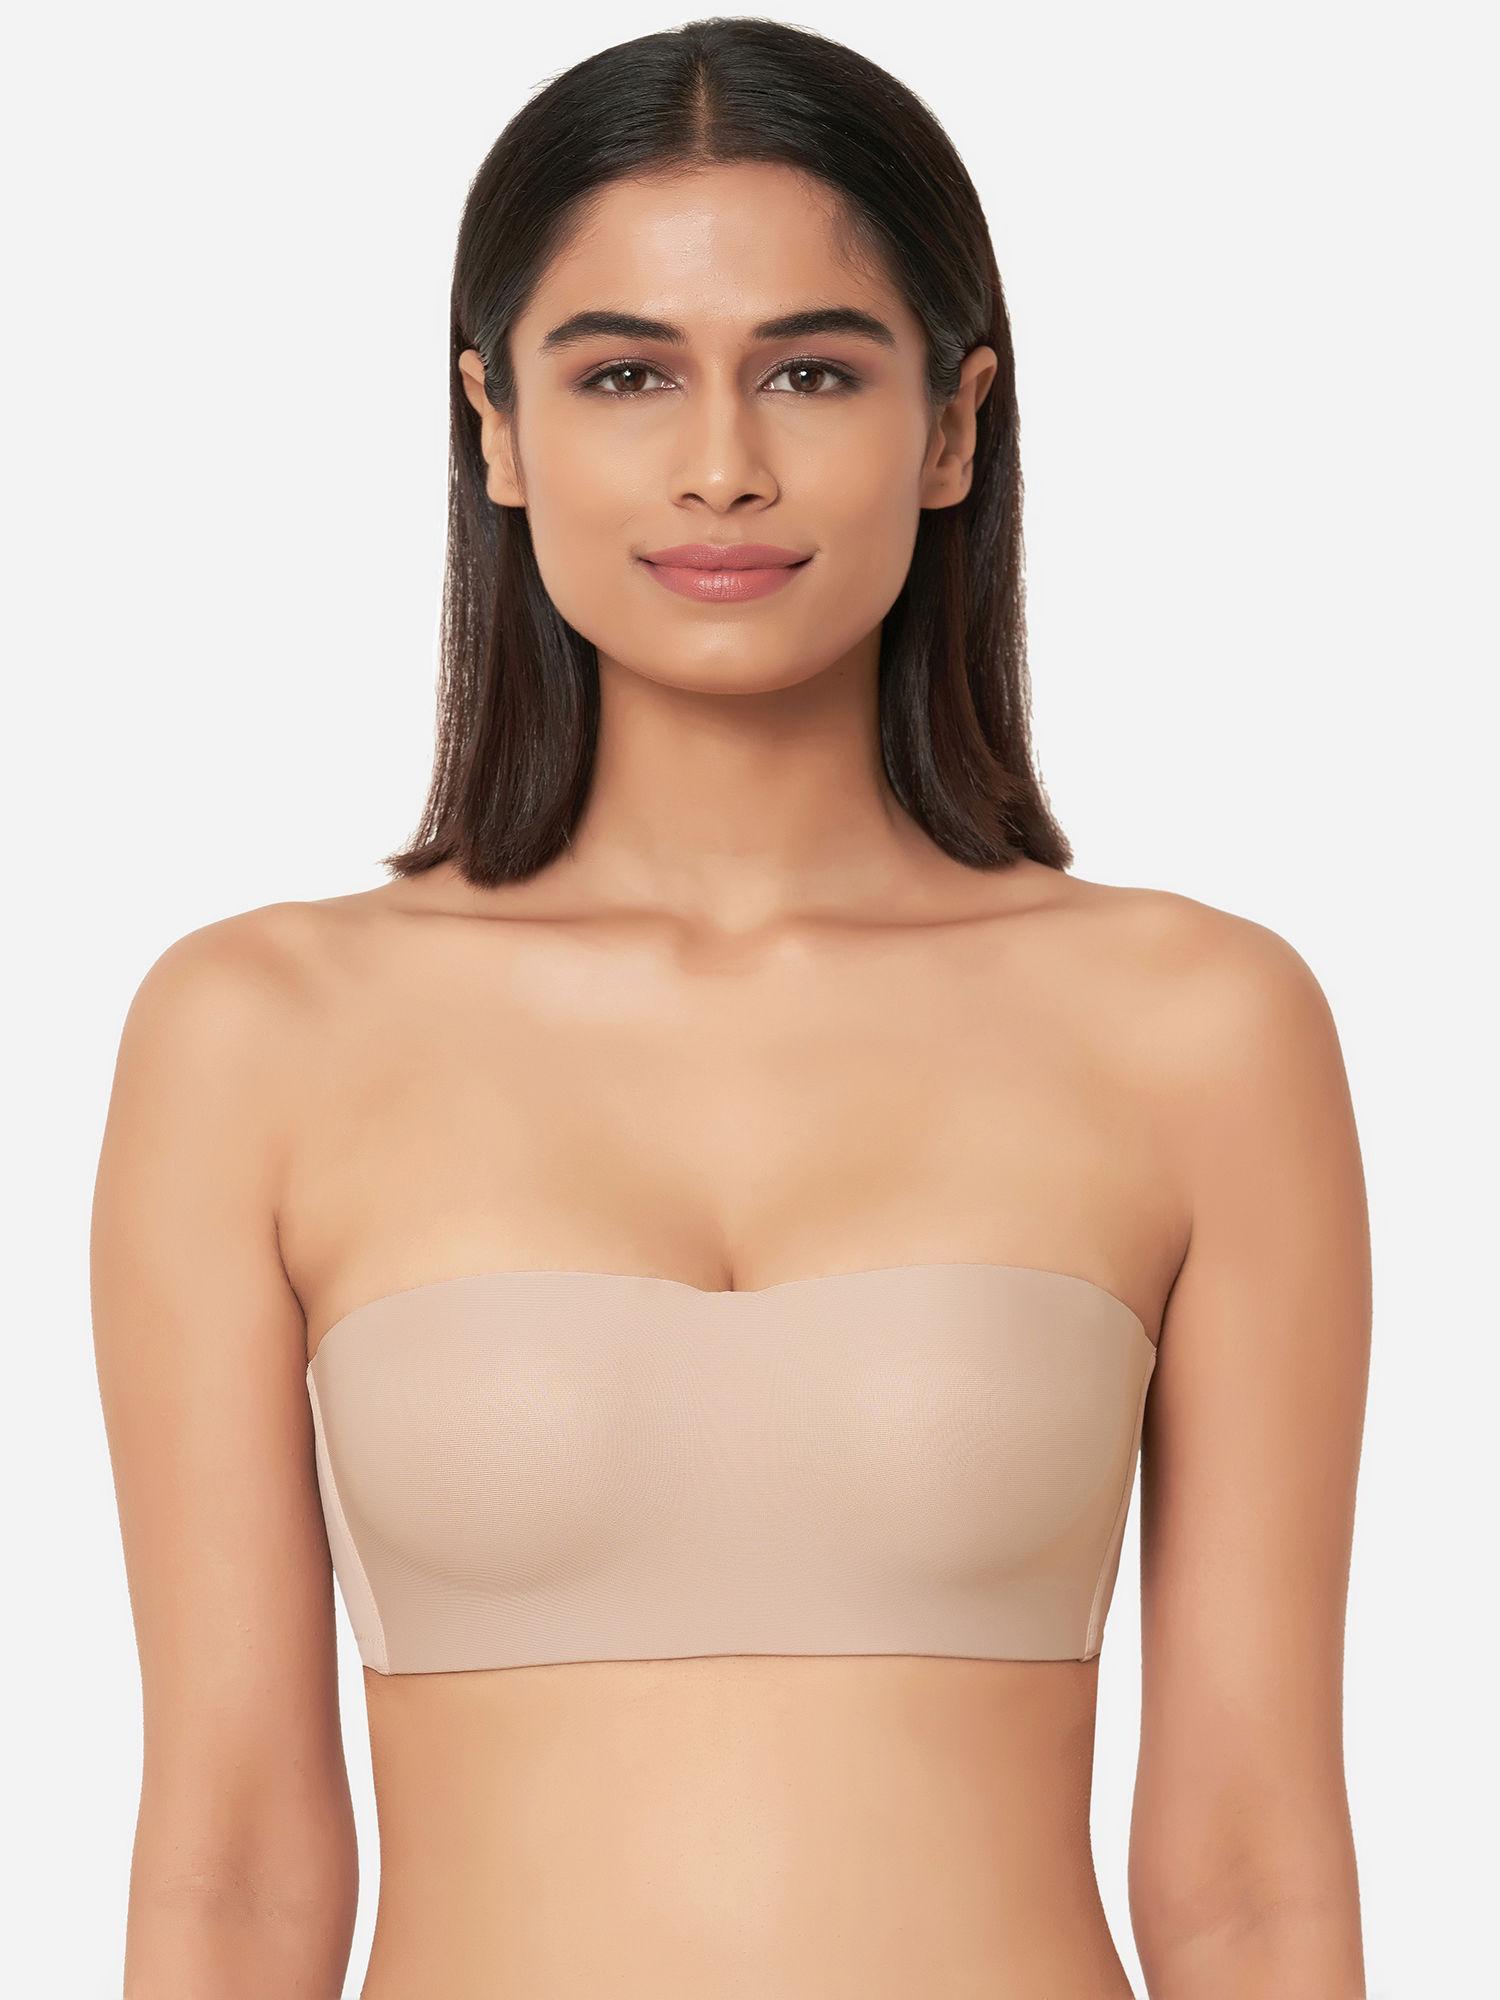 basic mold padded non-wired half cup strapless t-shirt bra - beige